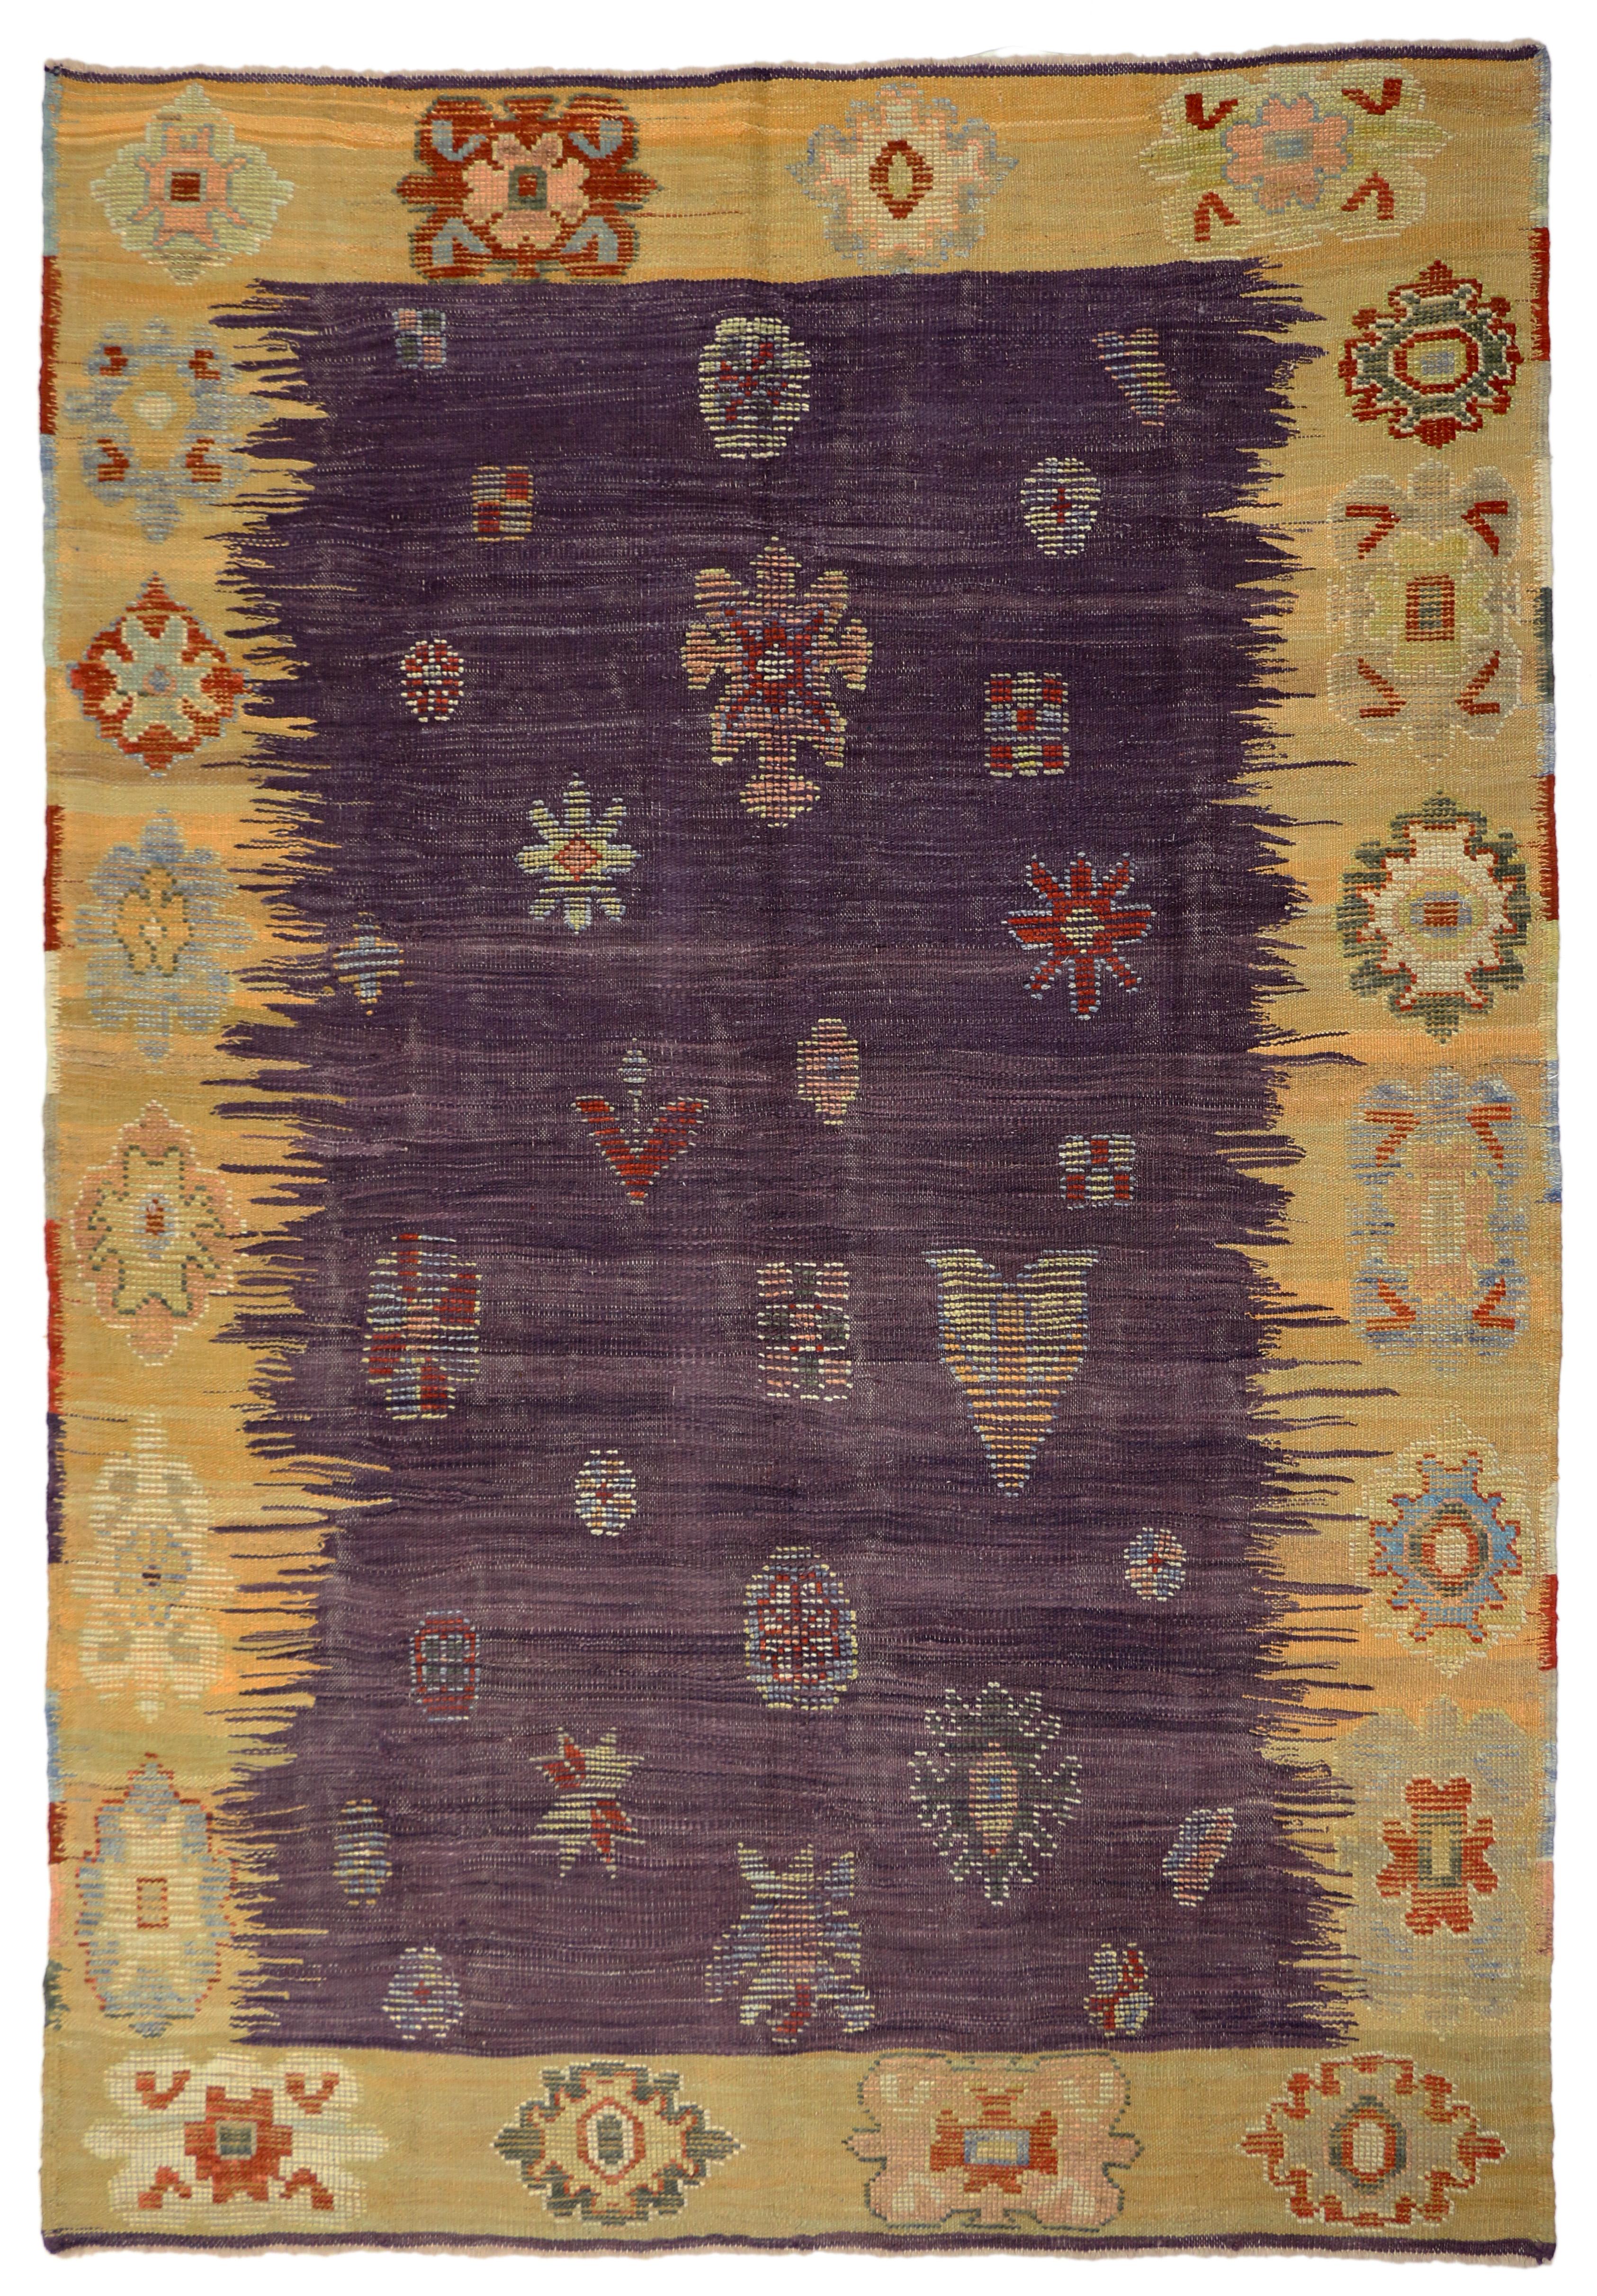 52203 Turkish Kilim rug with tribal style. Purple and yellow hues get playful in this contemporary Turkish kilim rug. A riot of geometric motifs add dimension, dynamic color and play perfectly with the tribal style. The motifs are rendered in